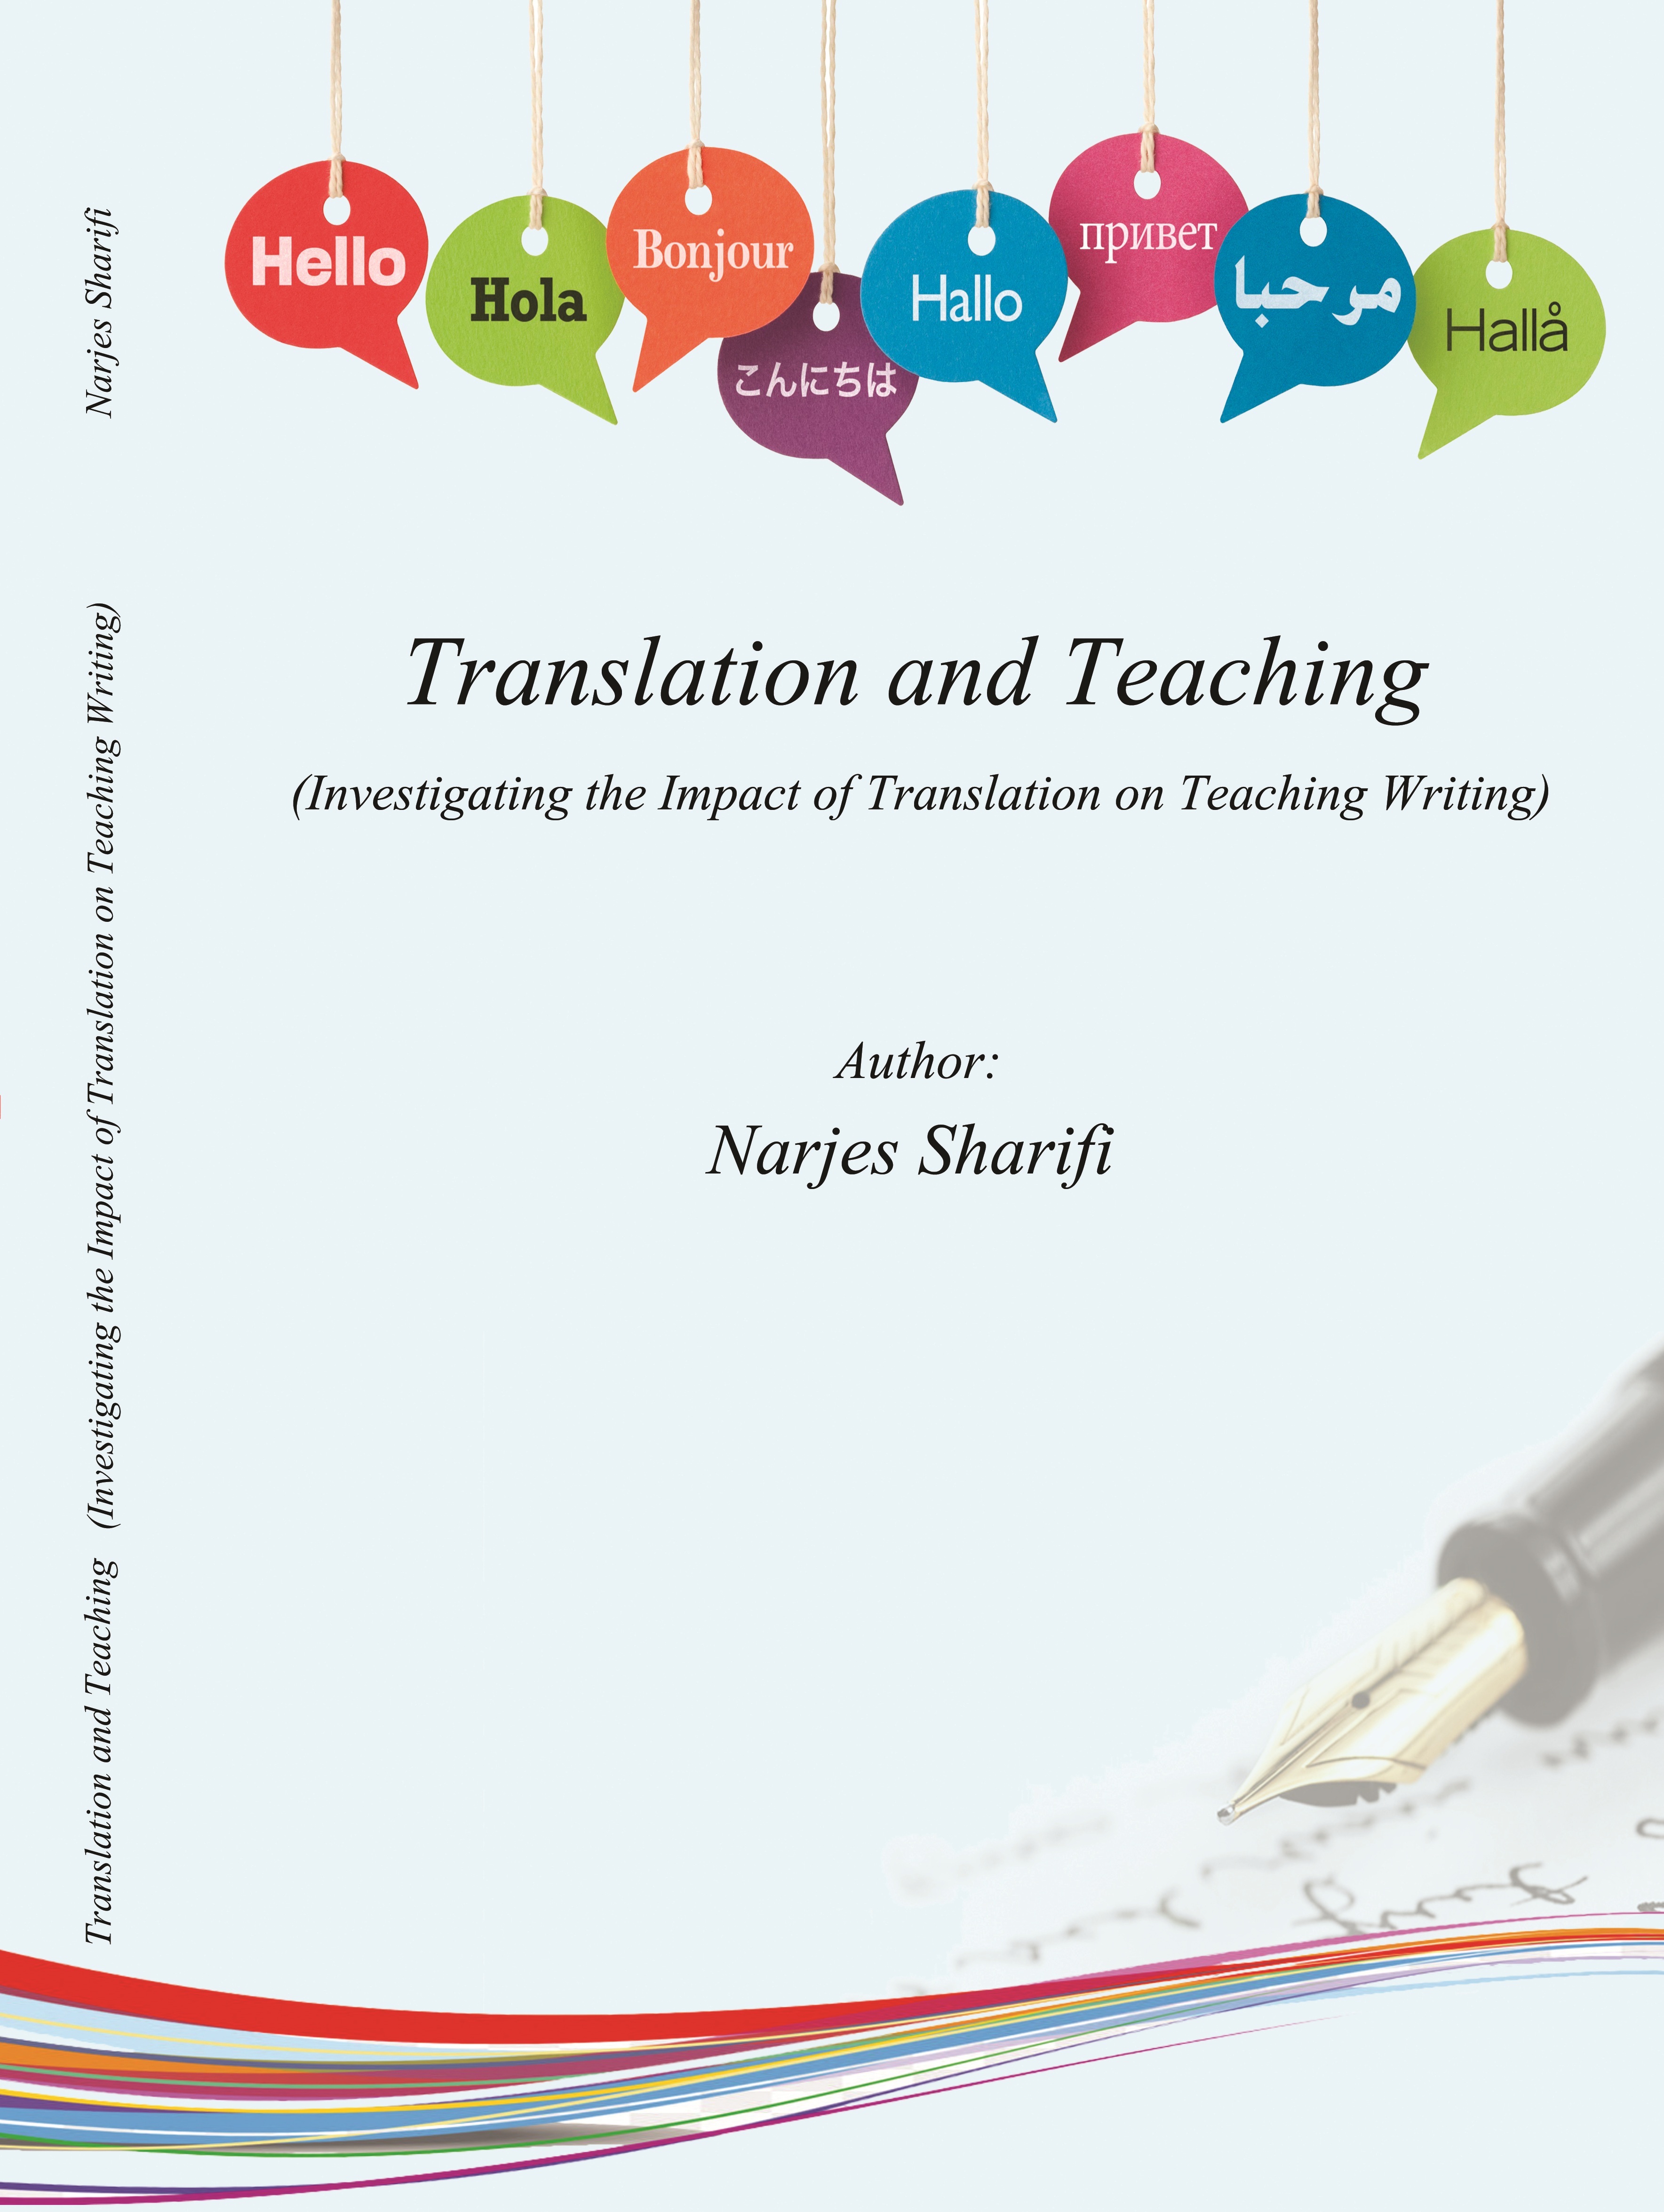 )Translation and Teaching (Investigationg the impact of translation on teaching writing